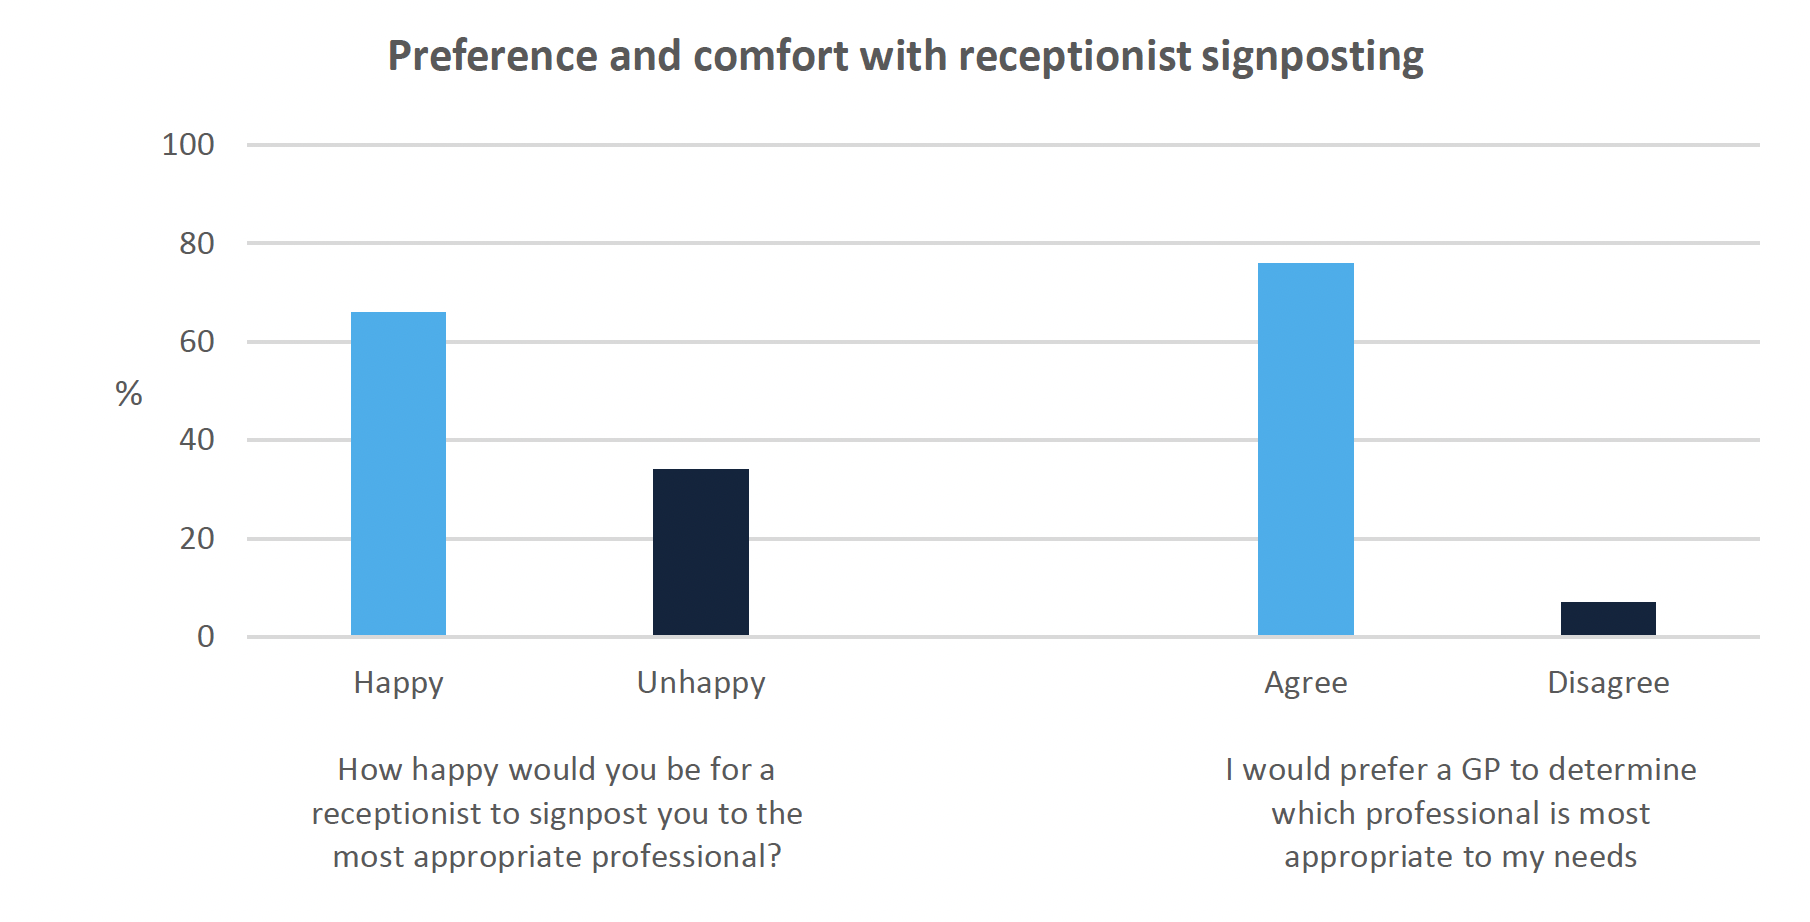 Double vertical bar graph showing views on receptionist signposting 
This double vertical bar graph shows respondents preference and comfort with general practice receptionists signposting patients. Just over one third (66%) of participants were happy for a receptionist to signpost them to the most appropriate professional although 76% of respondents preferred it when a GP determined which professional is more appropriate.